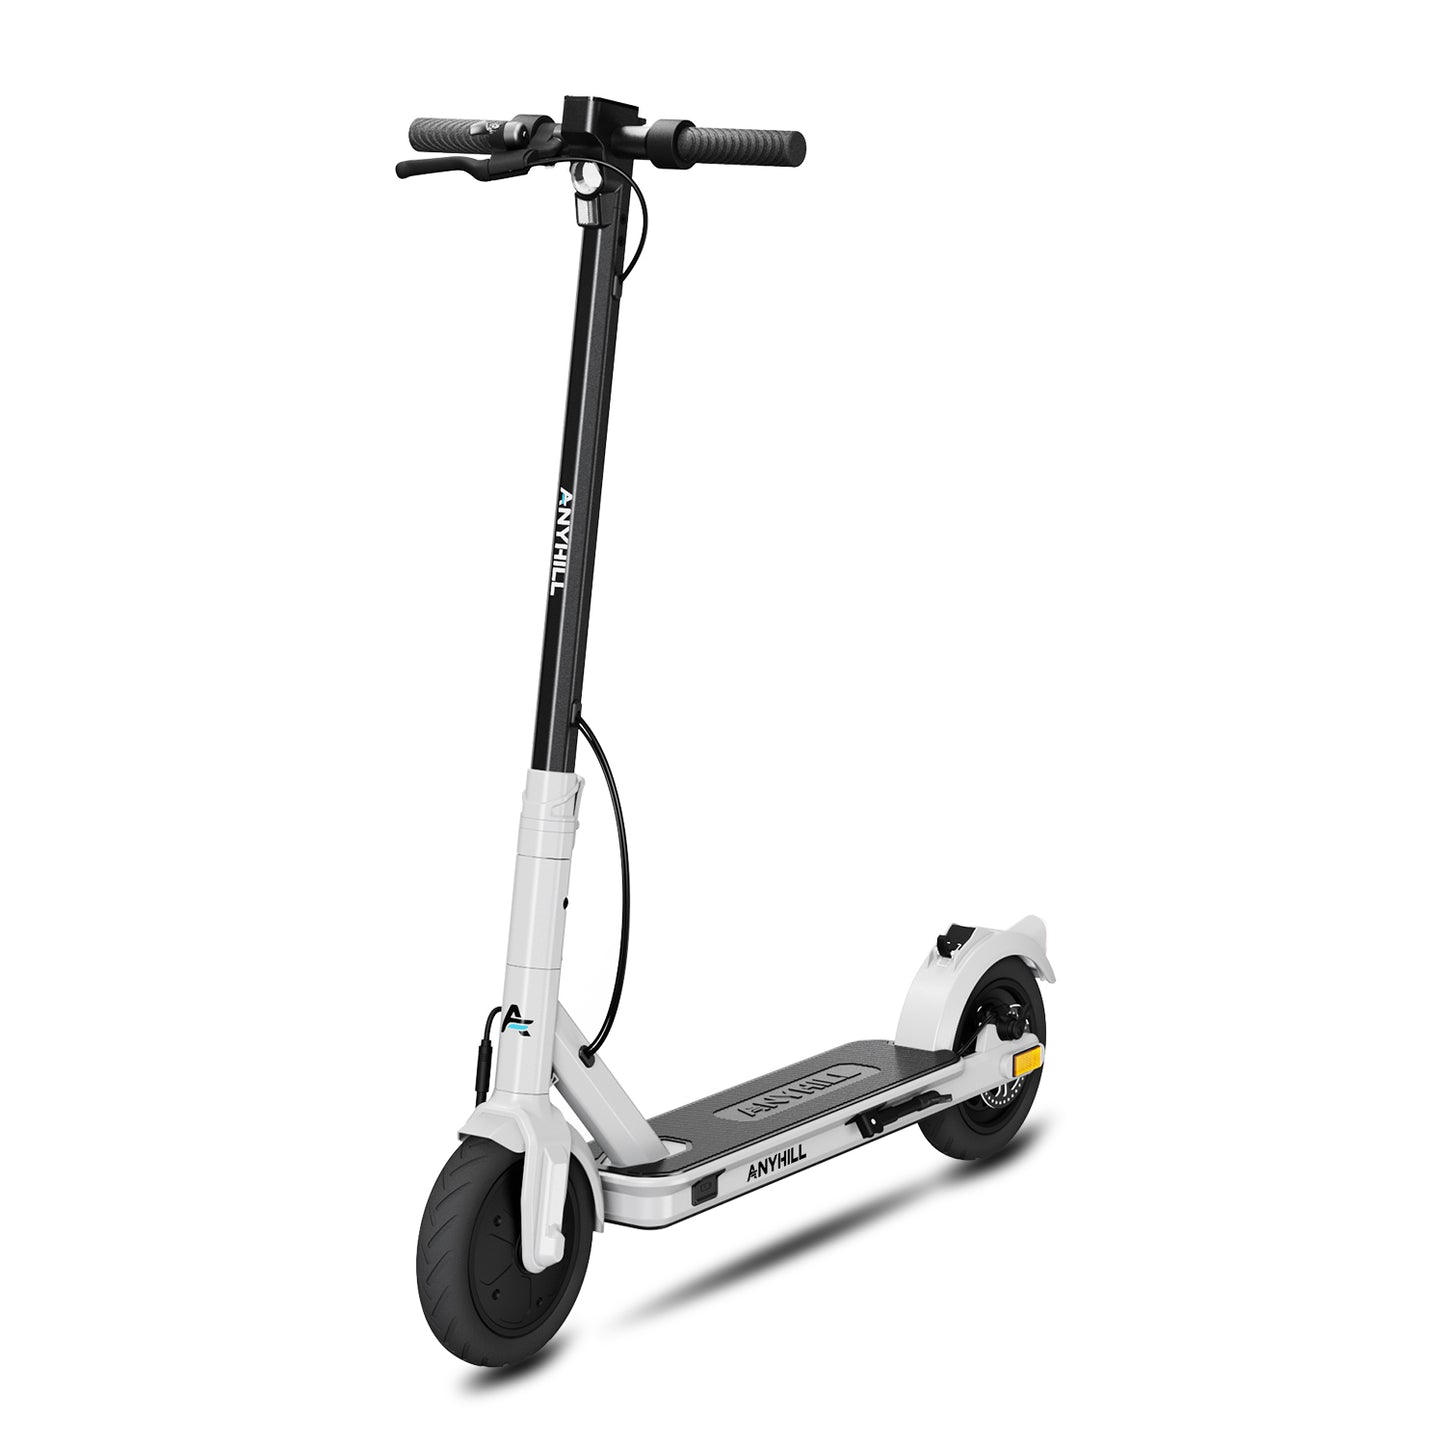 AnyHill UM-1 Electric Scooter - White | Bike Lover USA